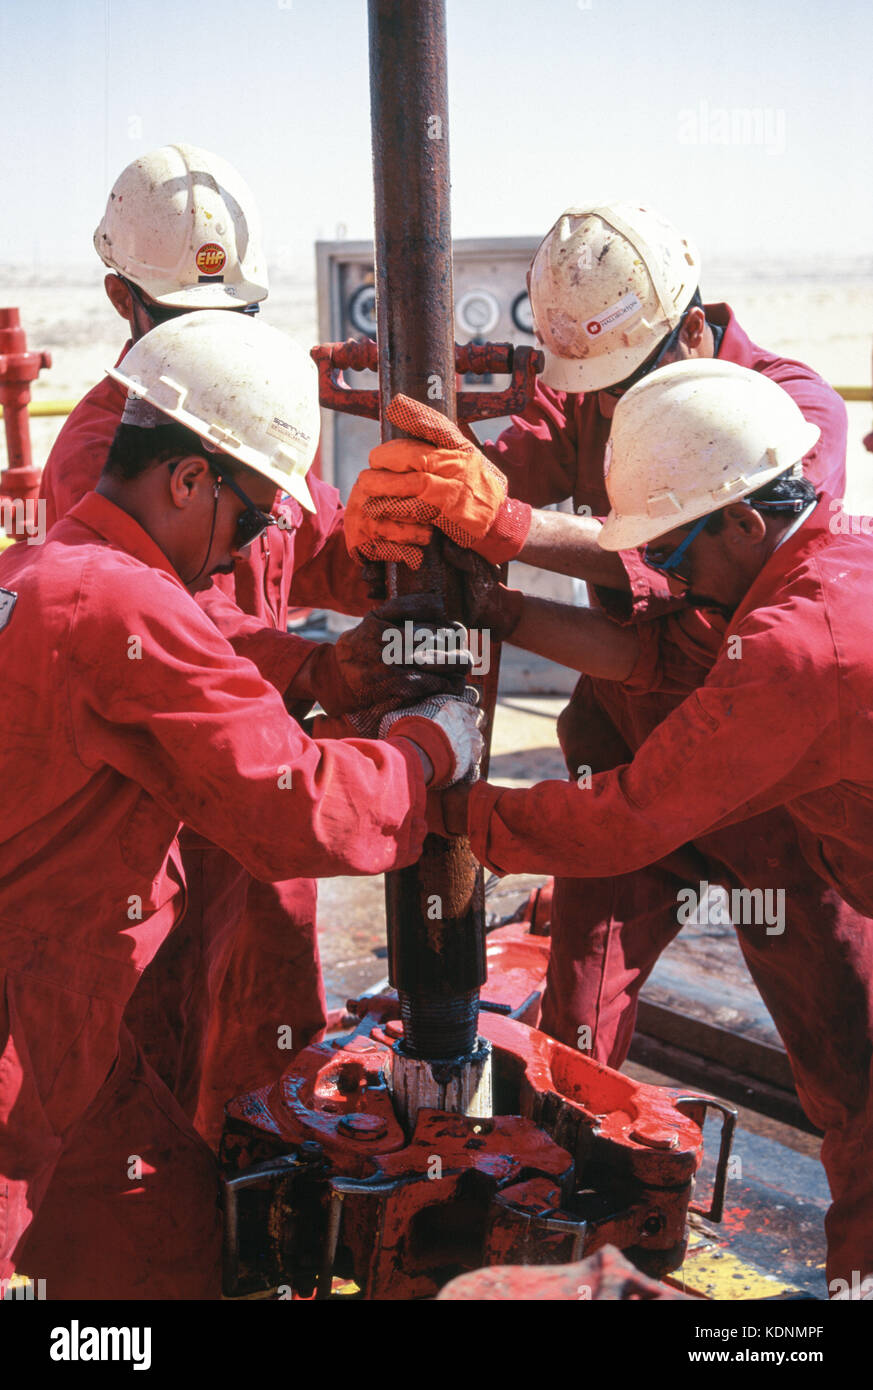 An oil rig exploring for oil and gas in the deserts of Saudi Arabia at Abqaiq Stock Photo